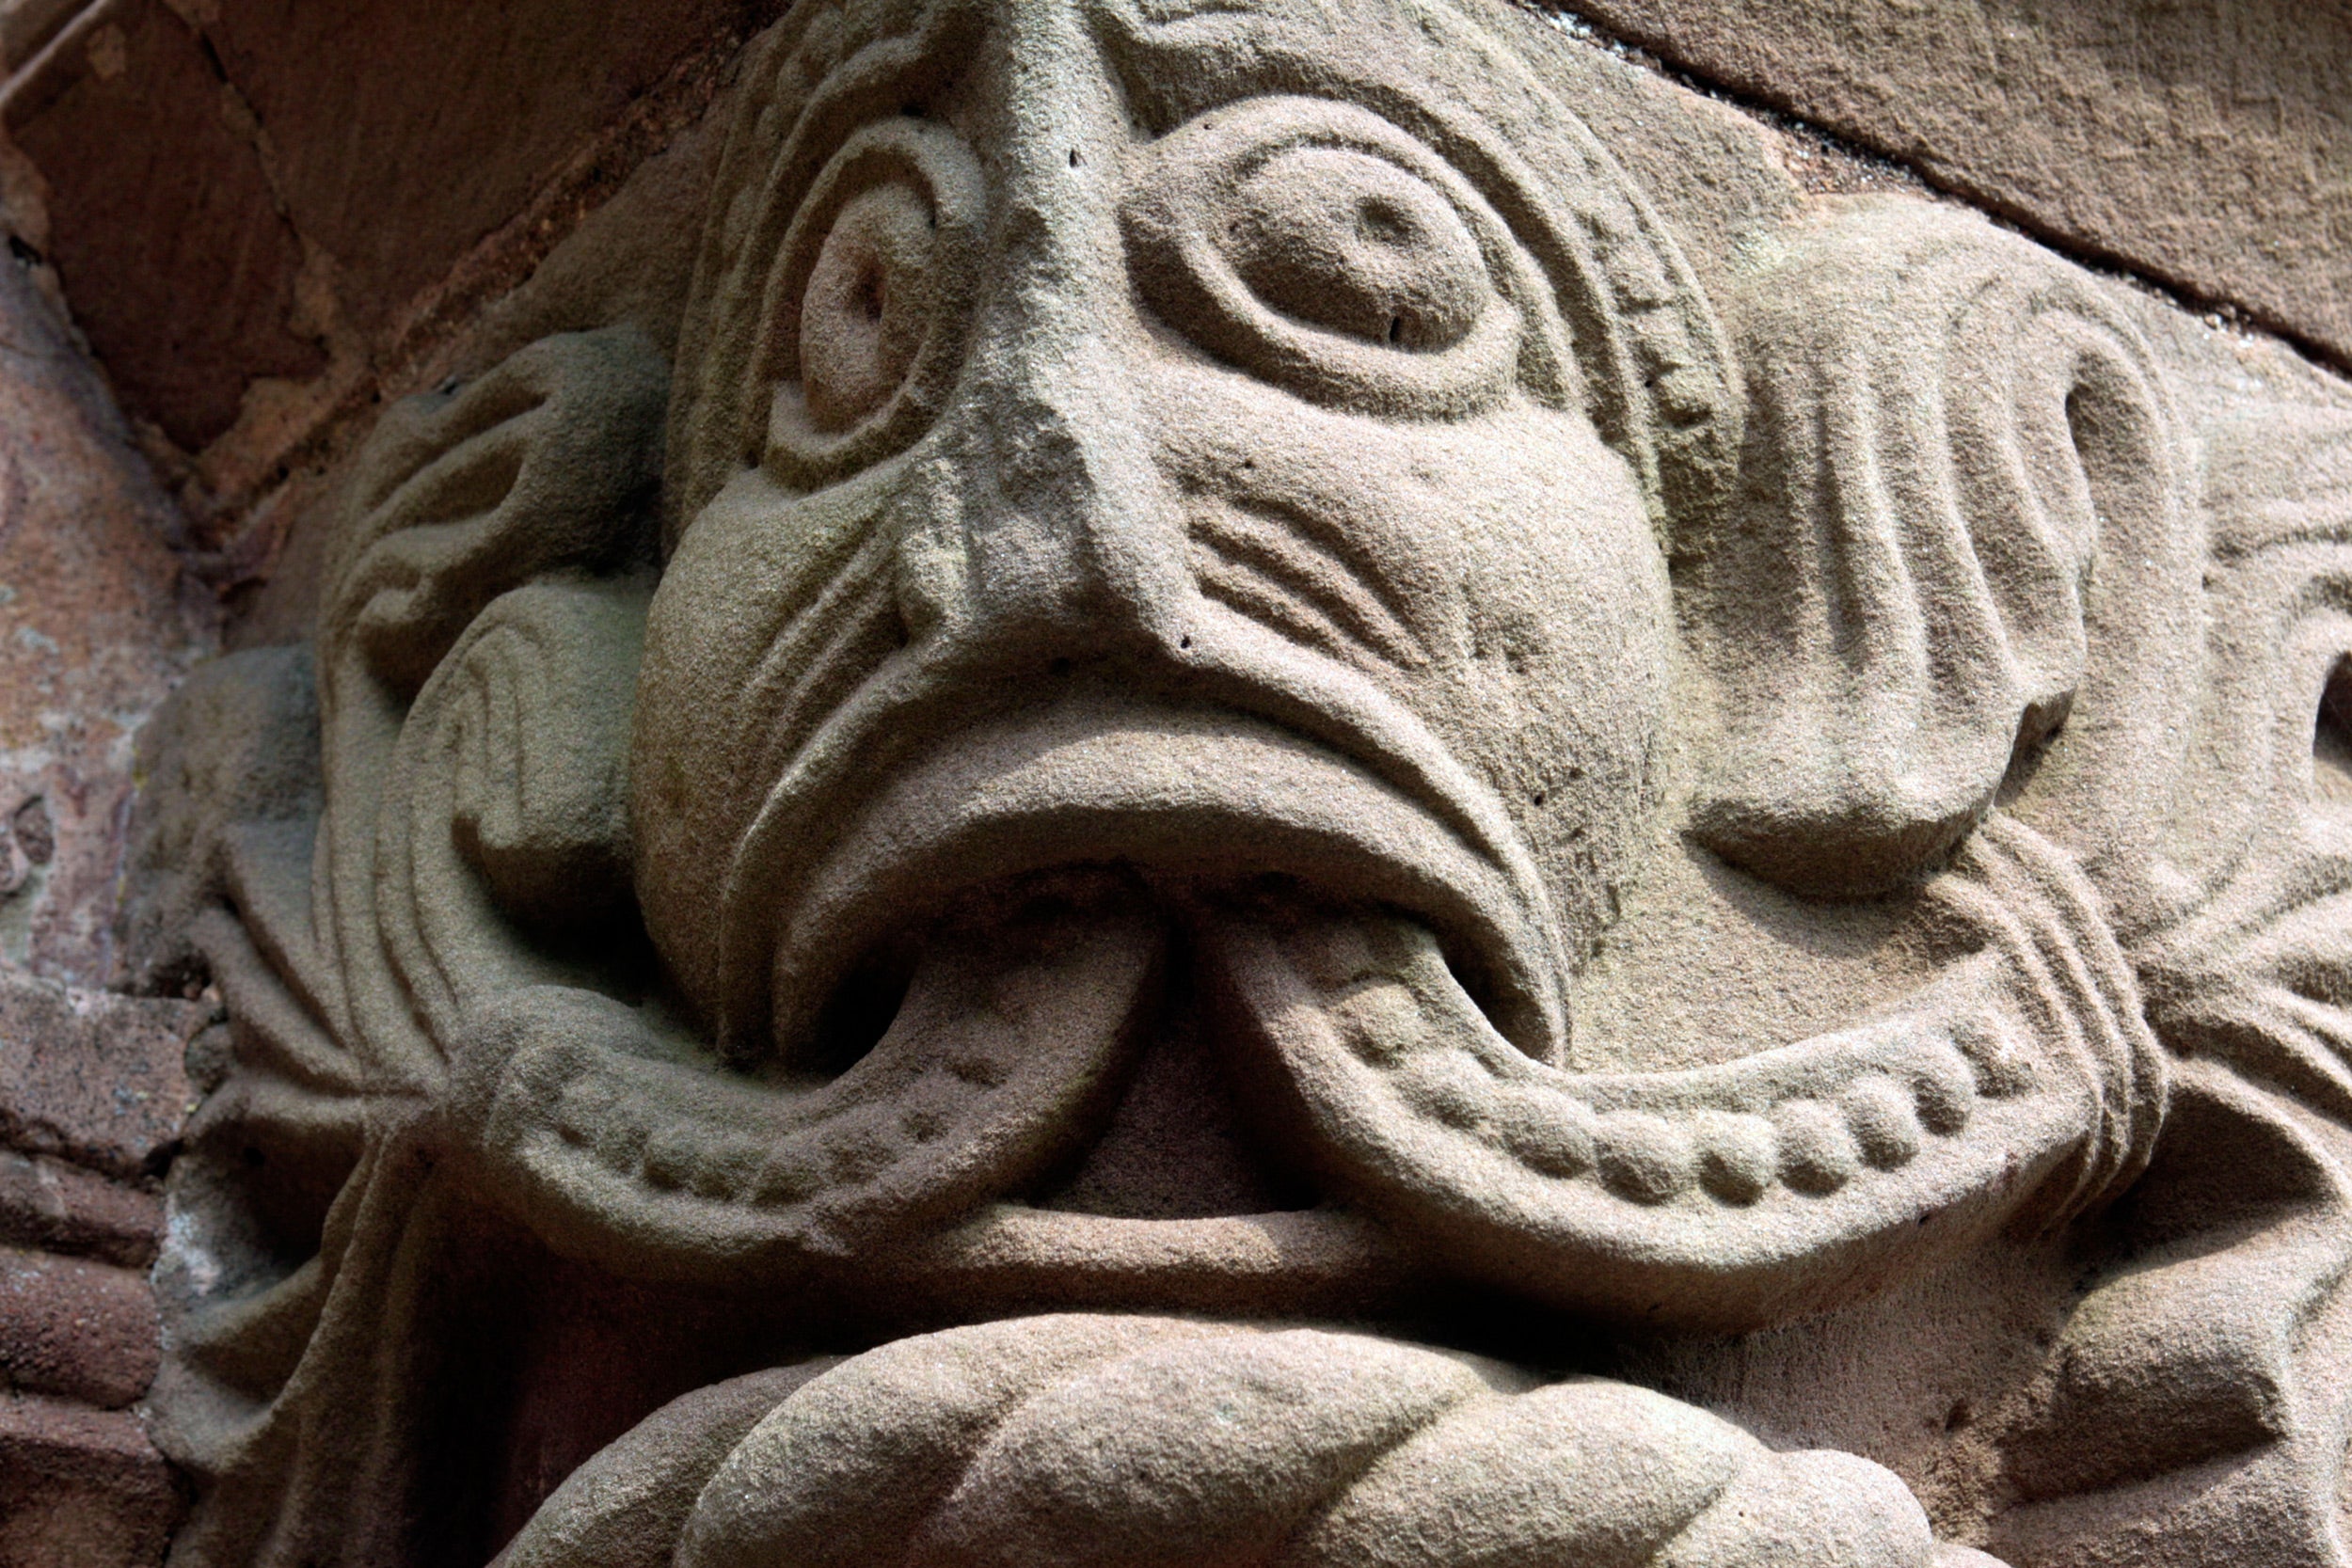 Norman 'Green Man' carving, Kilpeck Church, Herefordshire